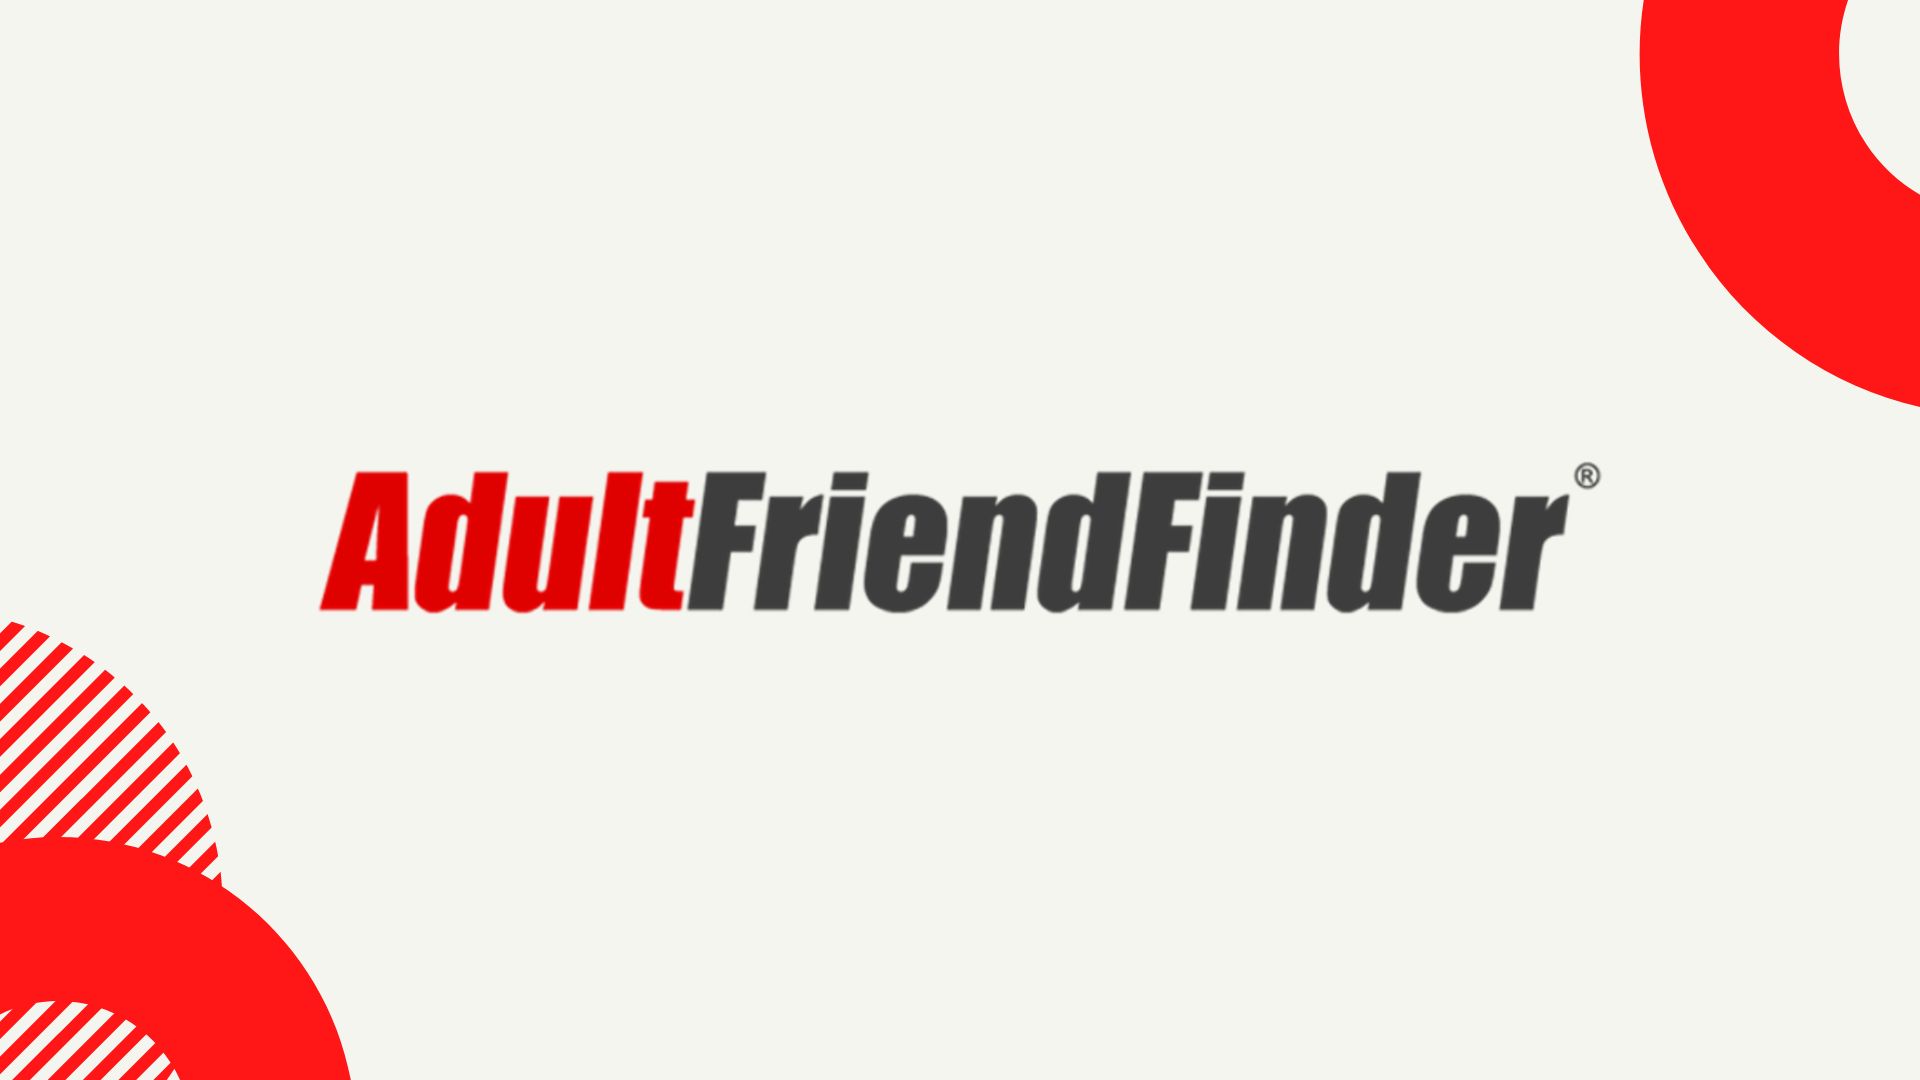 Adult FriendFinder What is it and is the site legit? Woman and Home image